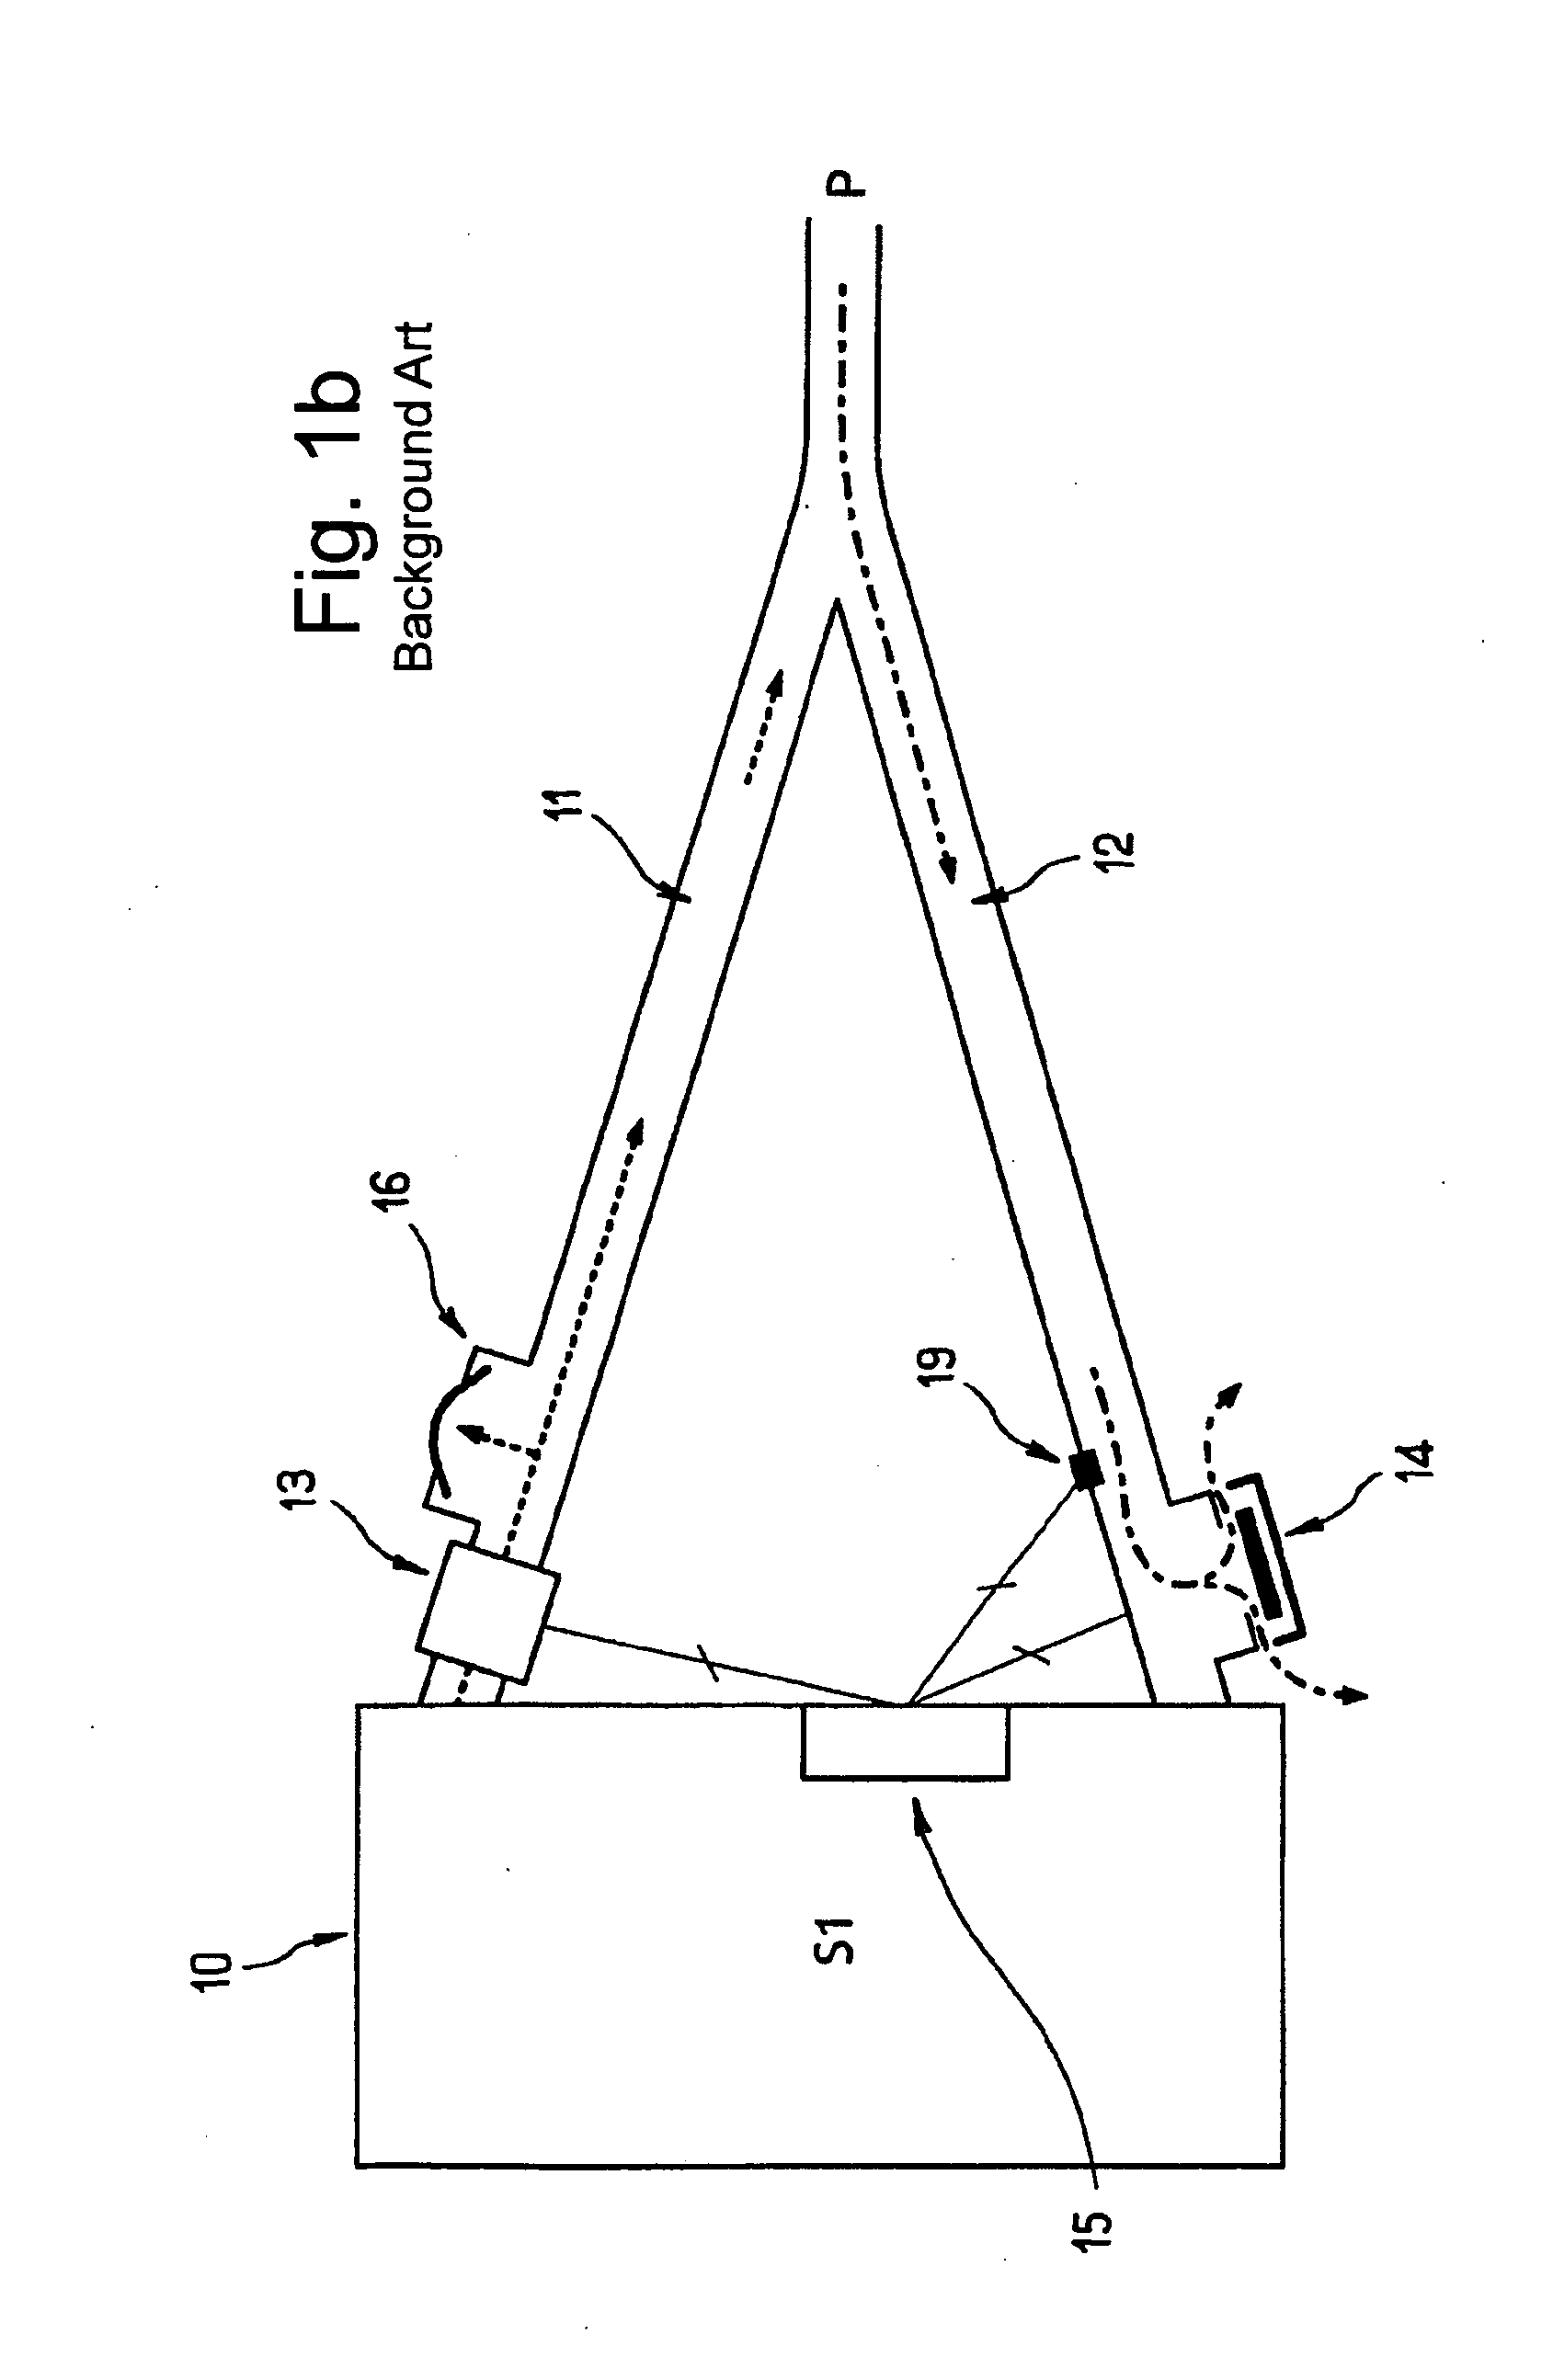 Breathing assistance device with linear actuated gas regulating valve